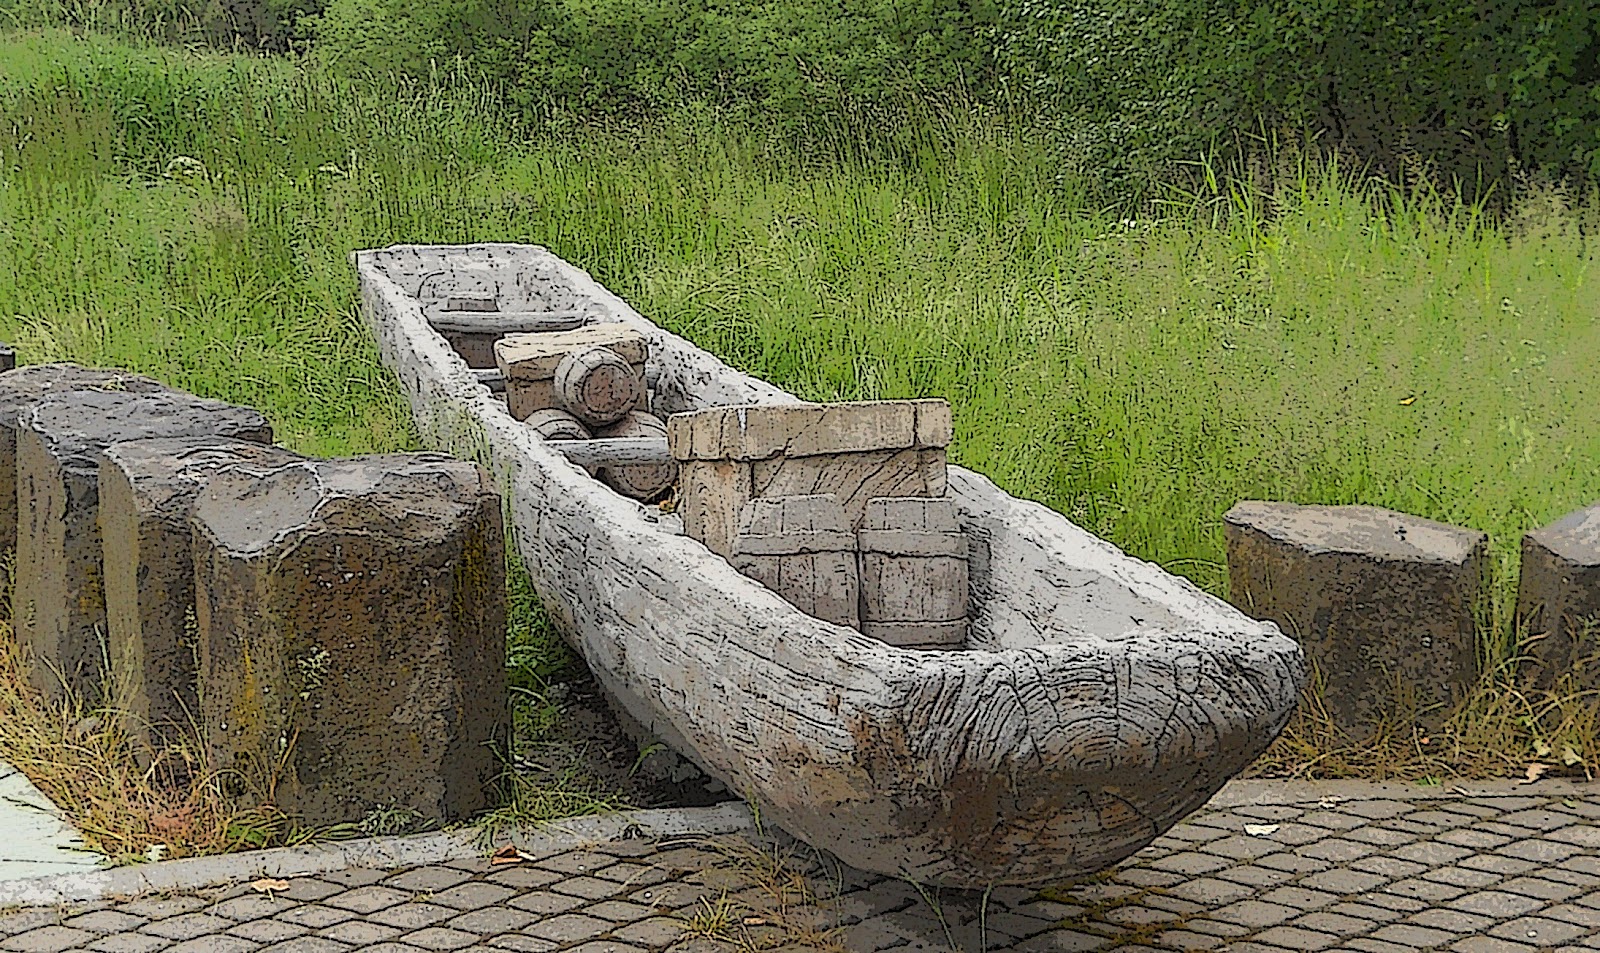 thom zehrfeld photography : dugout canoes at capt. william